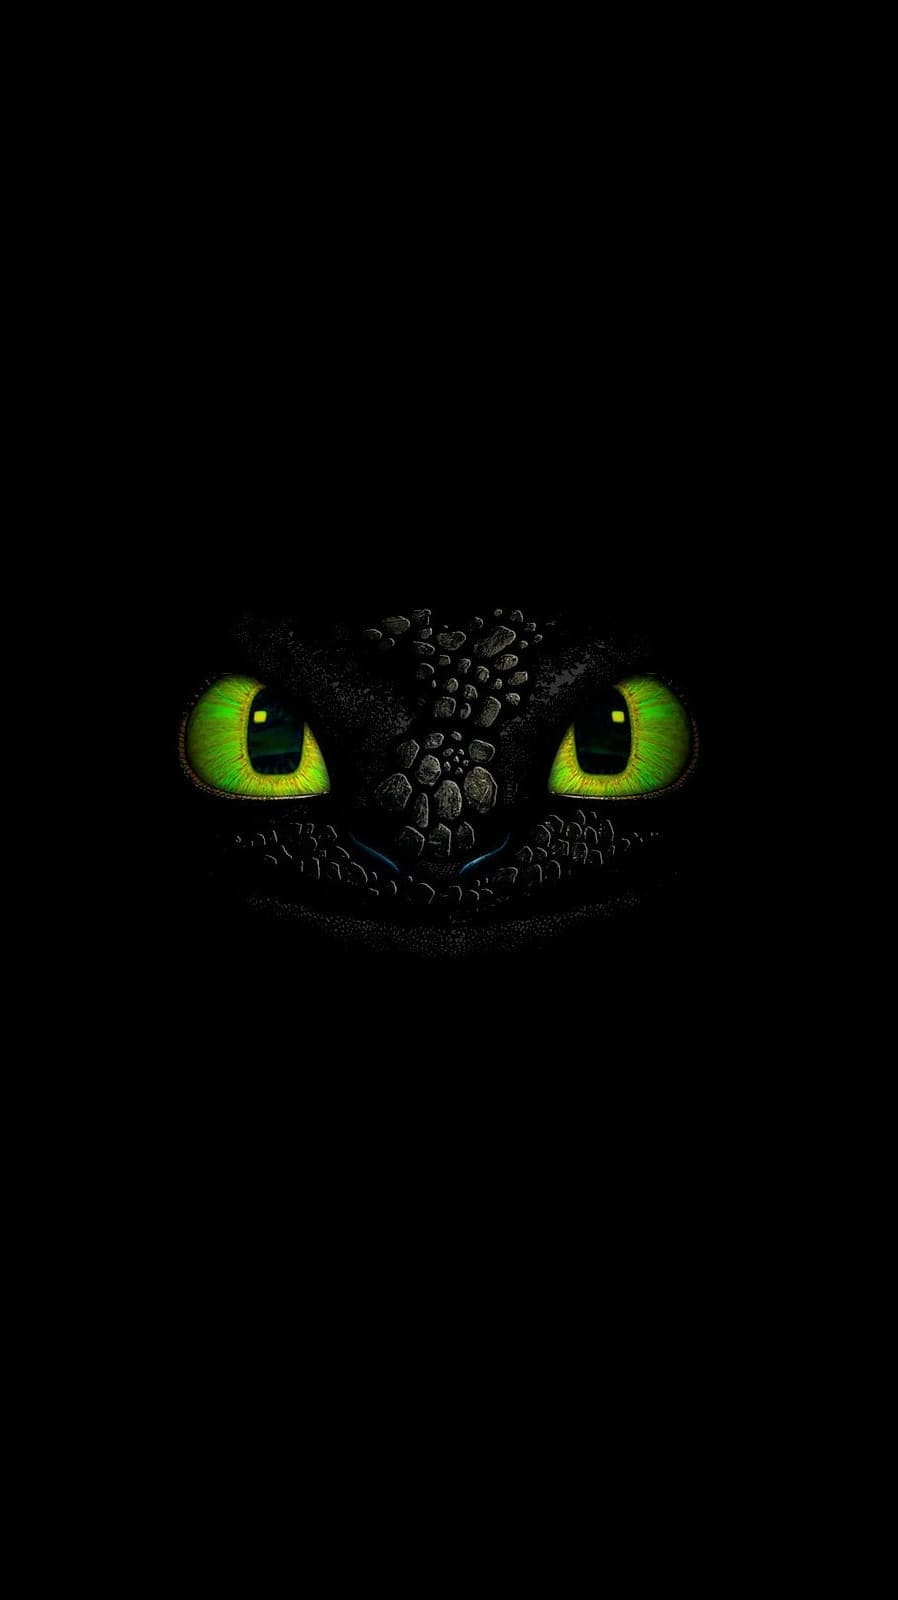 iphone 13 wallpaper How to Train Your Dragon movies simple background Black background dragon face Green eyes 13 pro max Wallpaper, iPhone 12 Background, iPhone Wallpaper, iPhone background., WallpaperUpdate